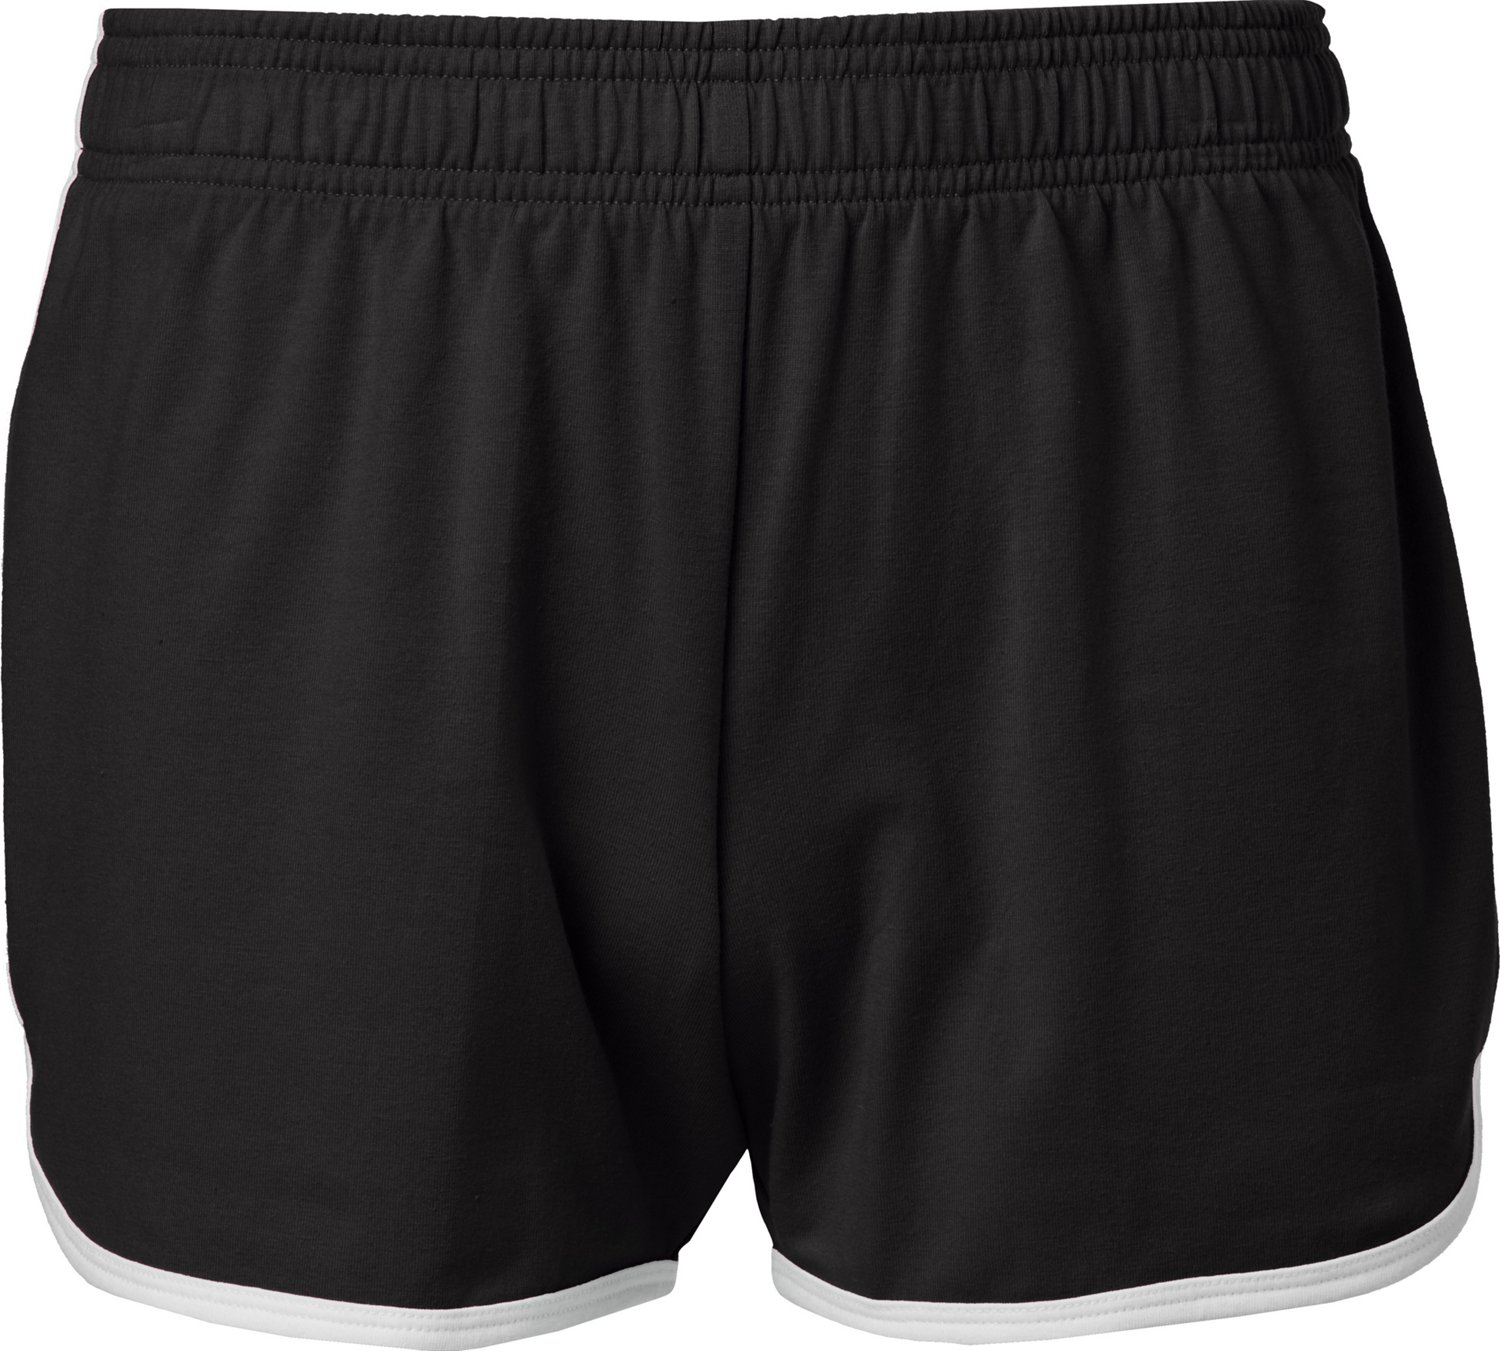 Under Armour Shorts Girls Youth Small Pink Black Athletic Running Gym  Casual 